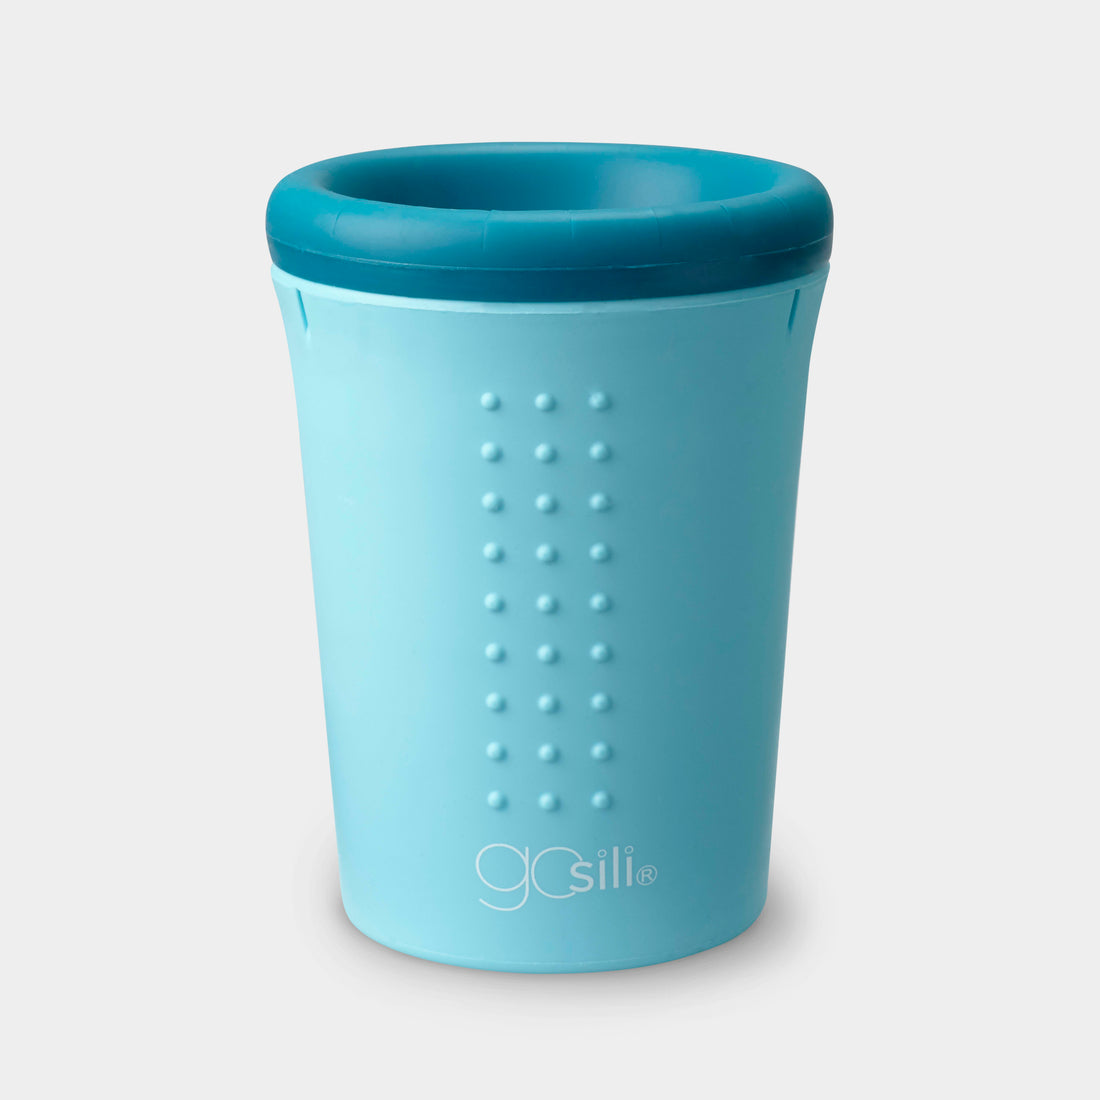 OH! No-Spill Silicone Cup, 12oz